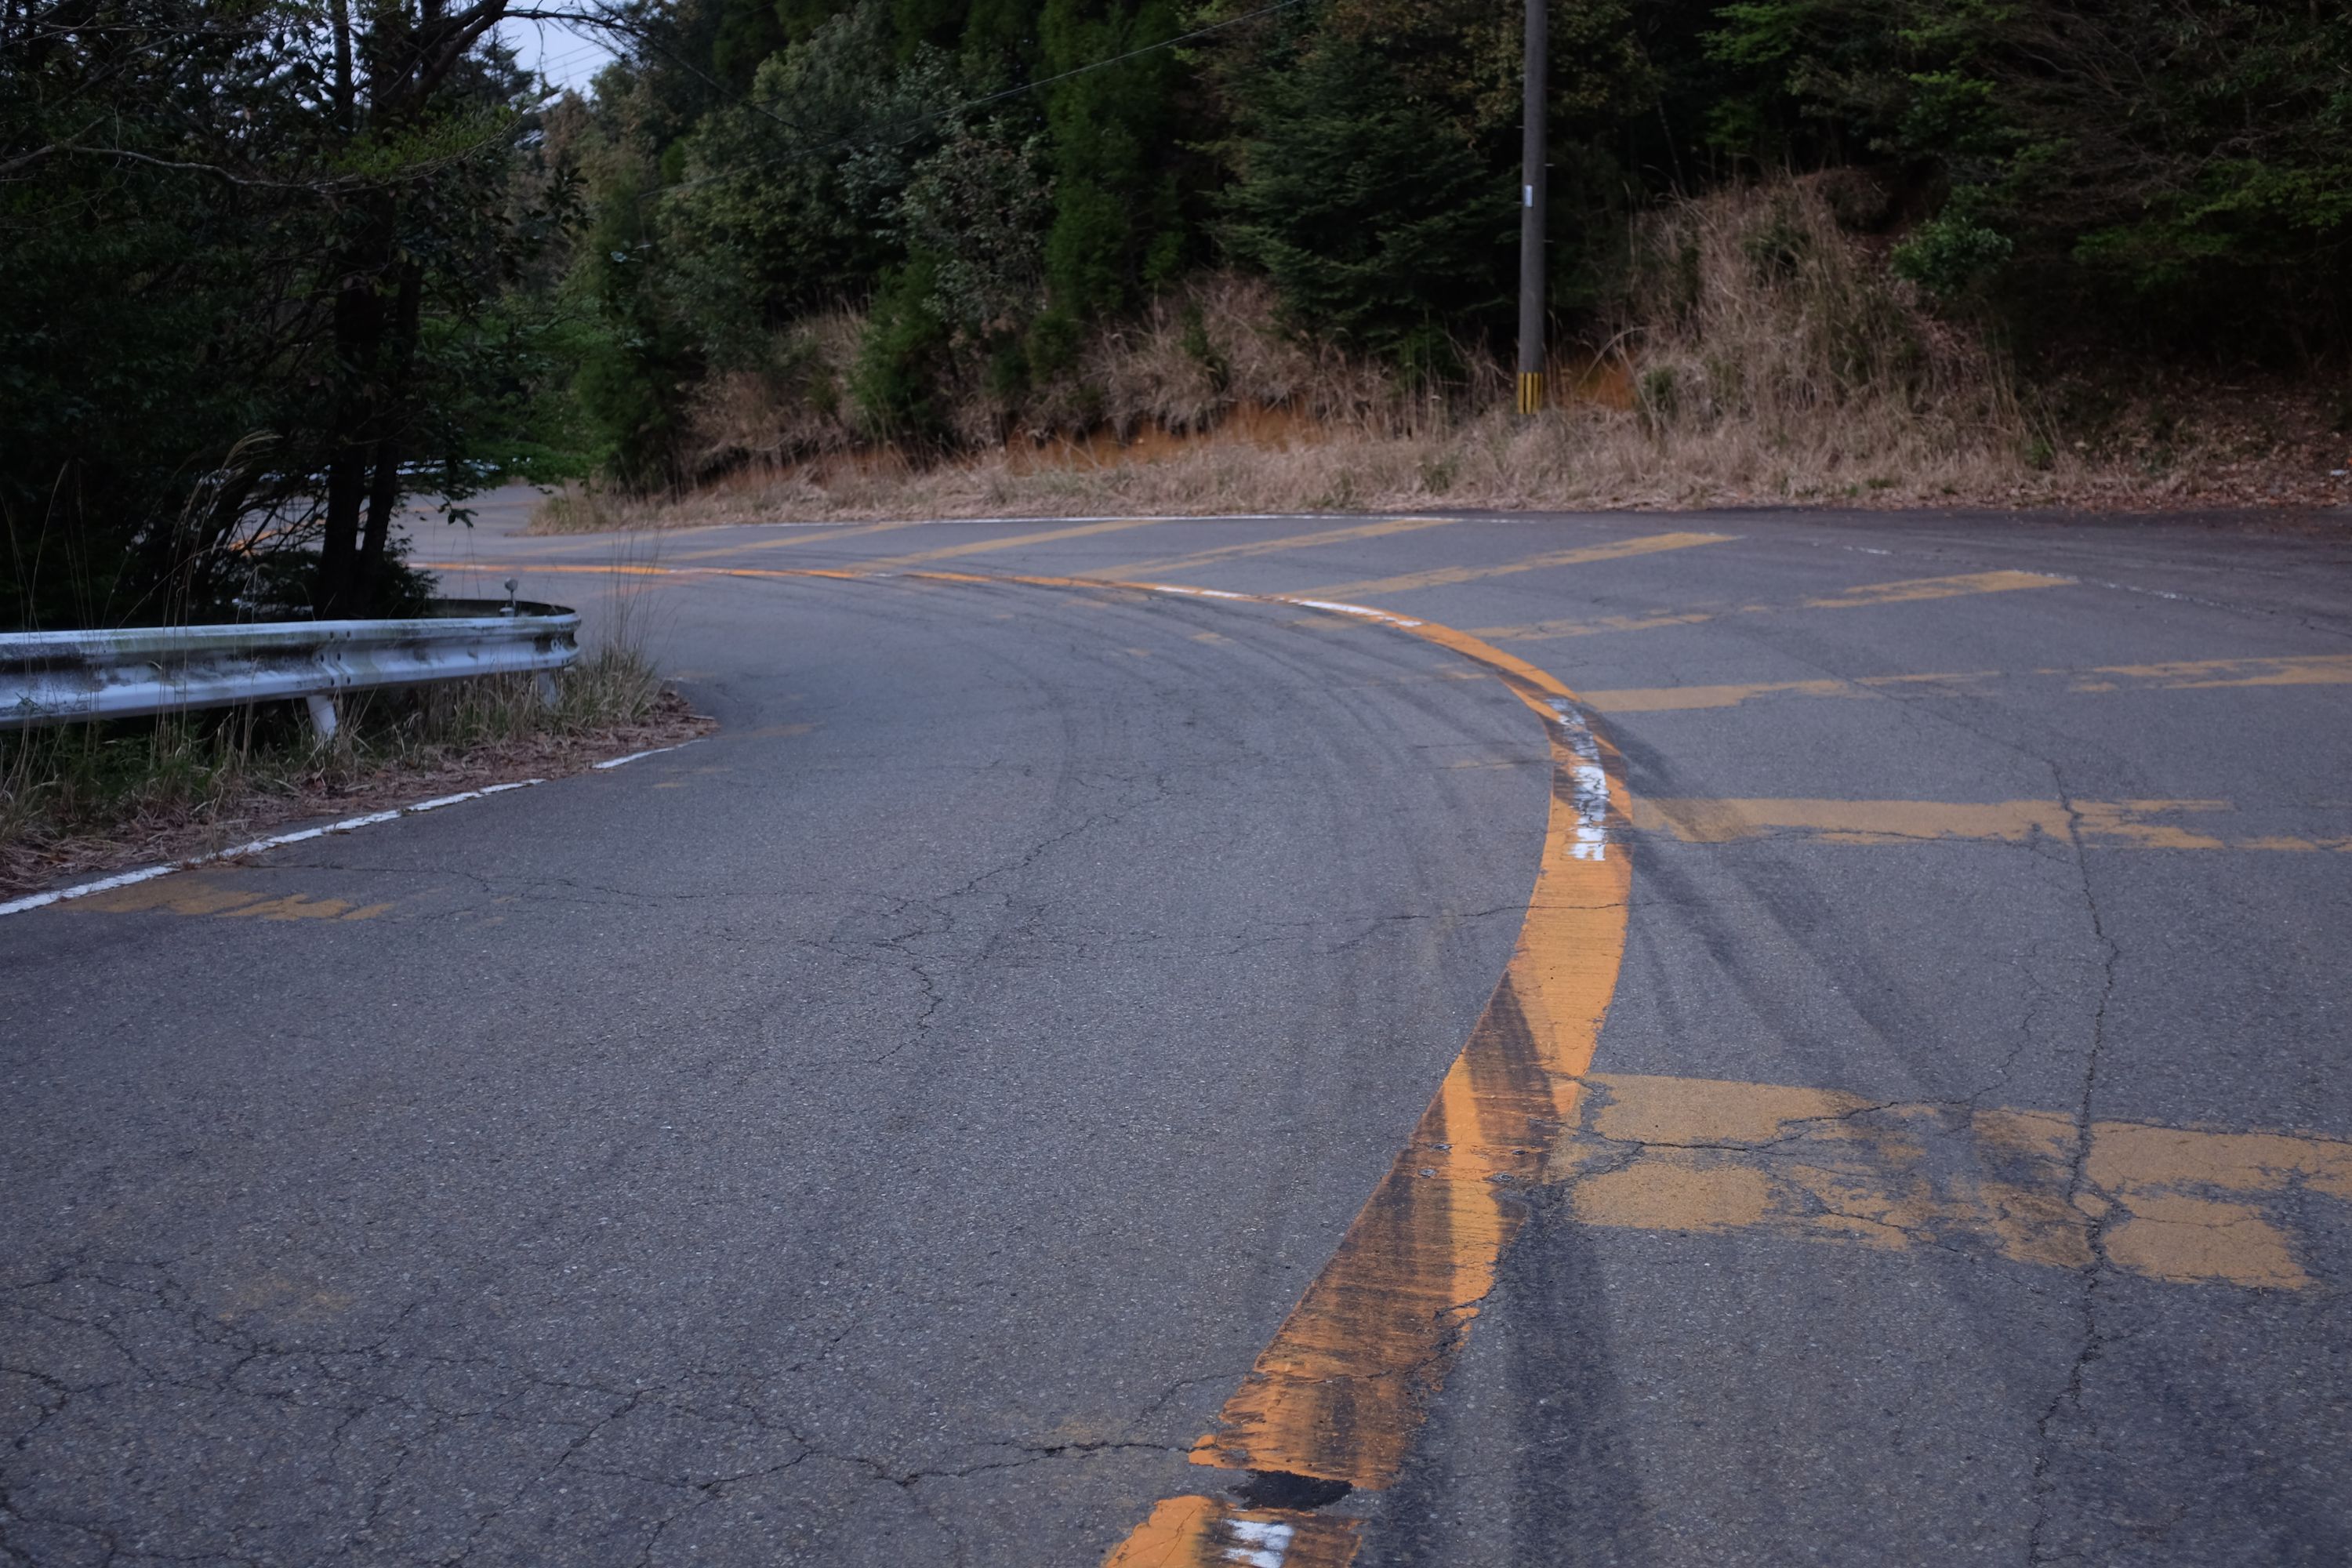 A mountain road shows tire tracks that hint at street racing.